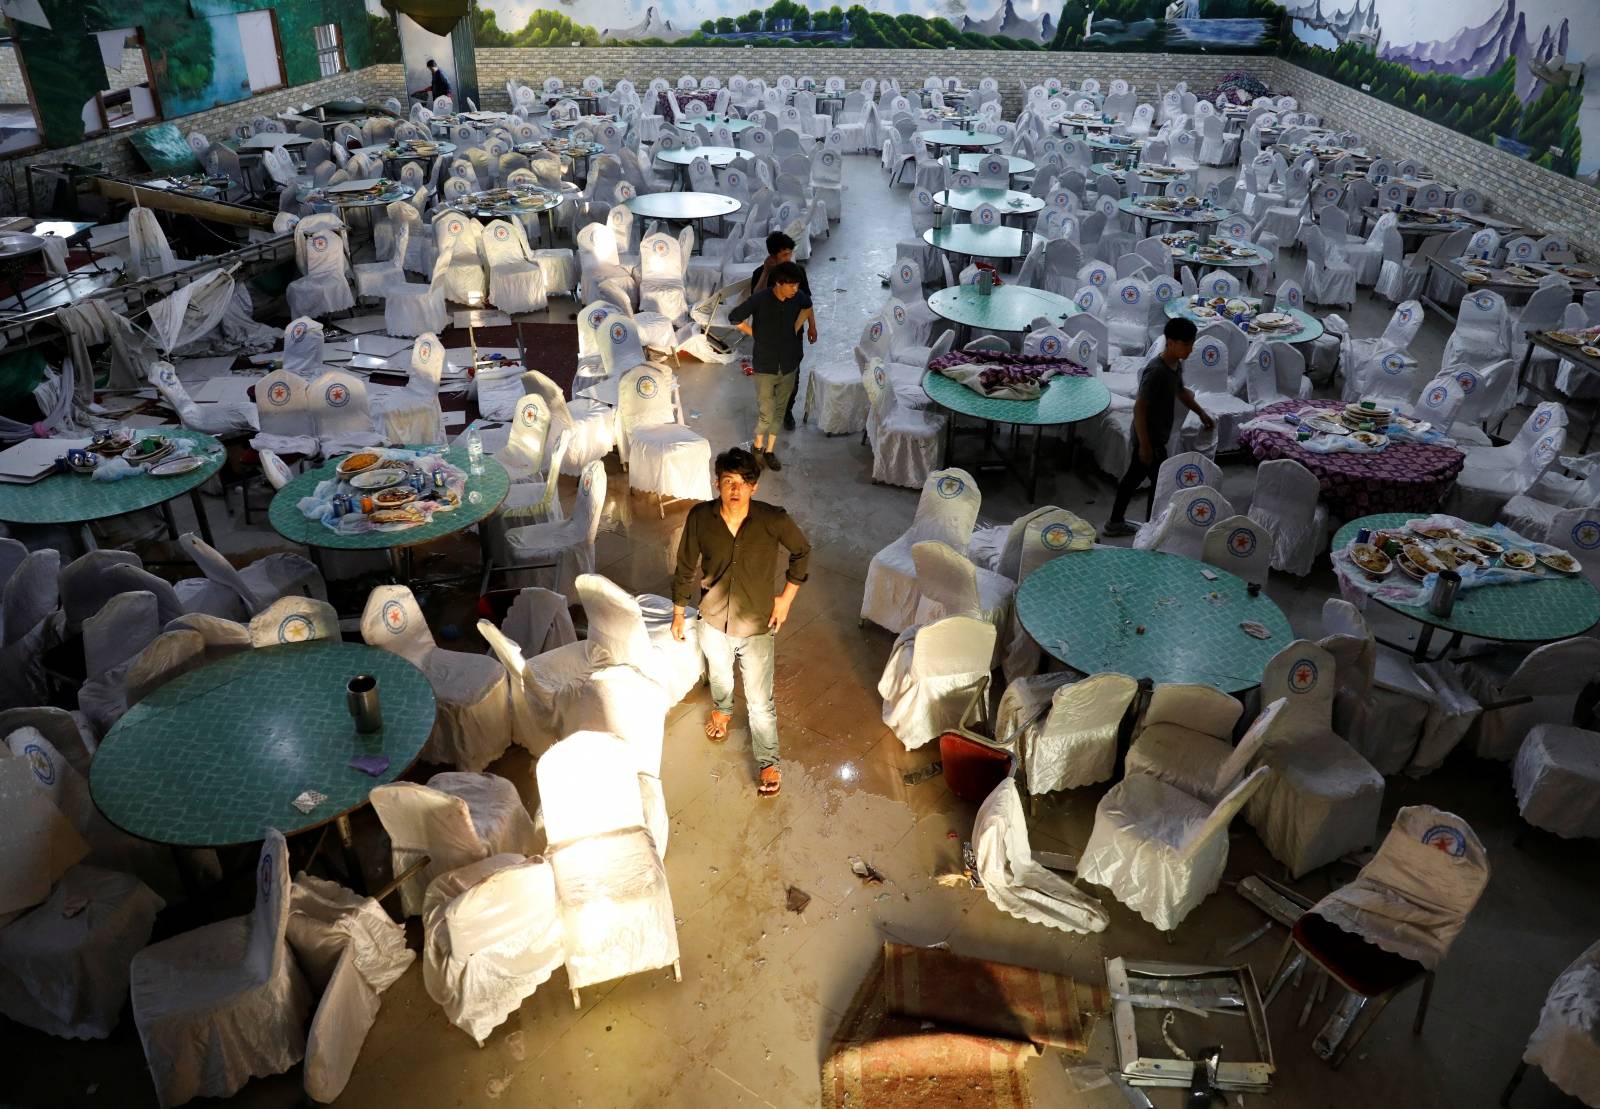 Workers inspect a damaged wedding hall after a blast in Kabul, Afghanistan